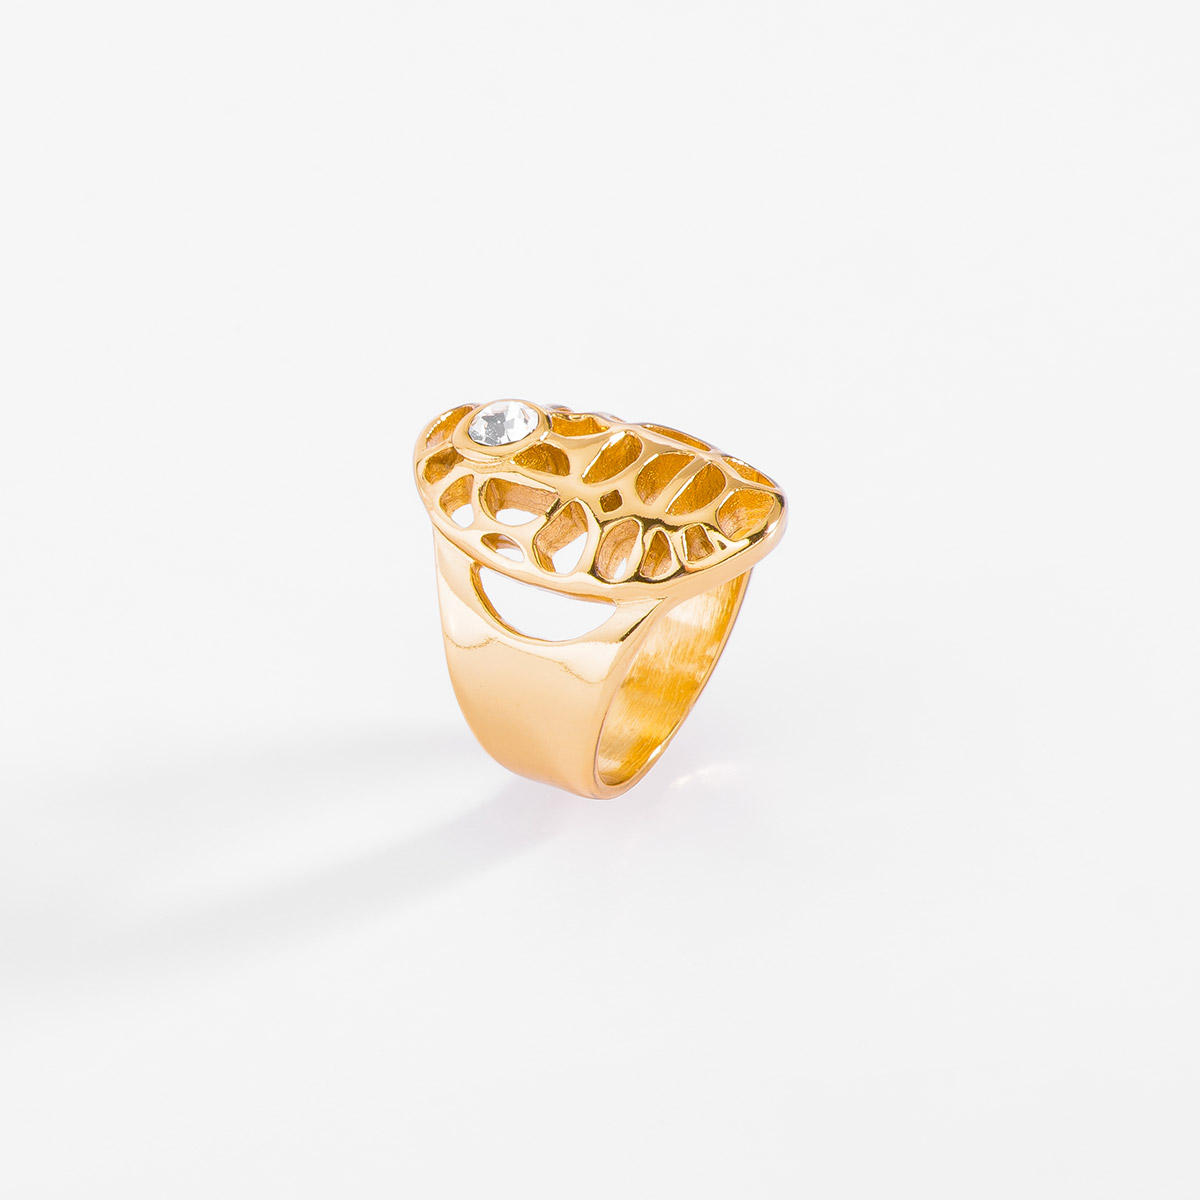 GOLD PLATED RING WITH CRYSTAL TONE STONE SIZE 6